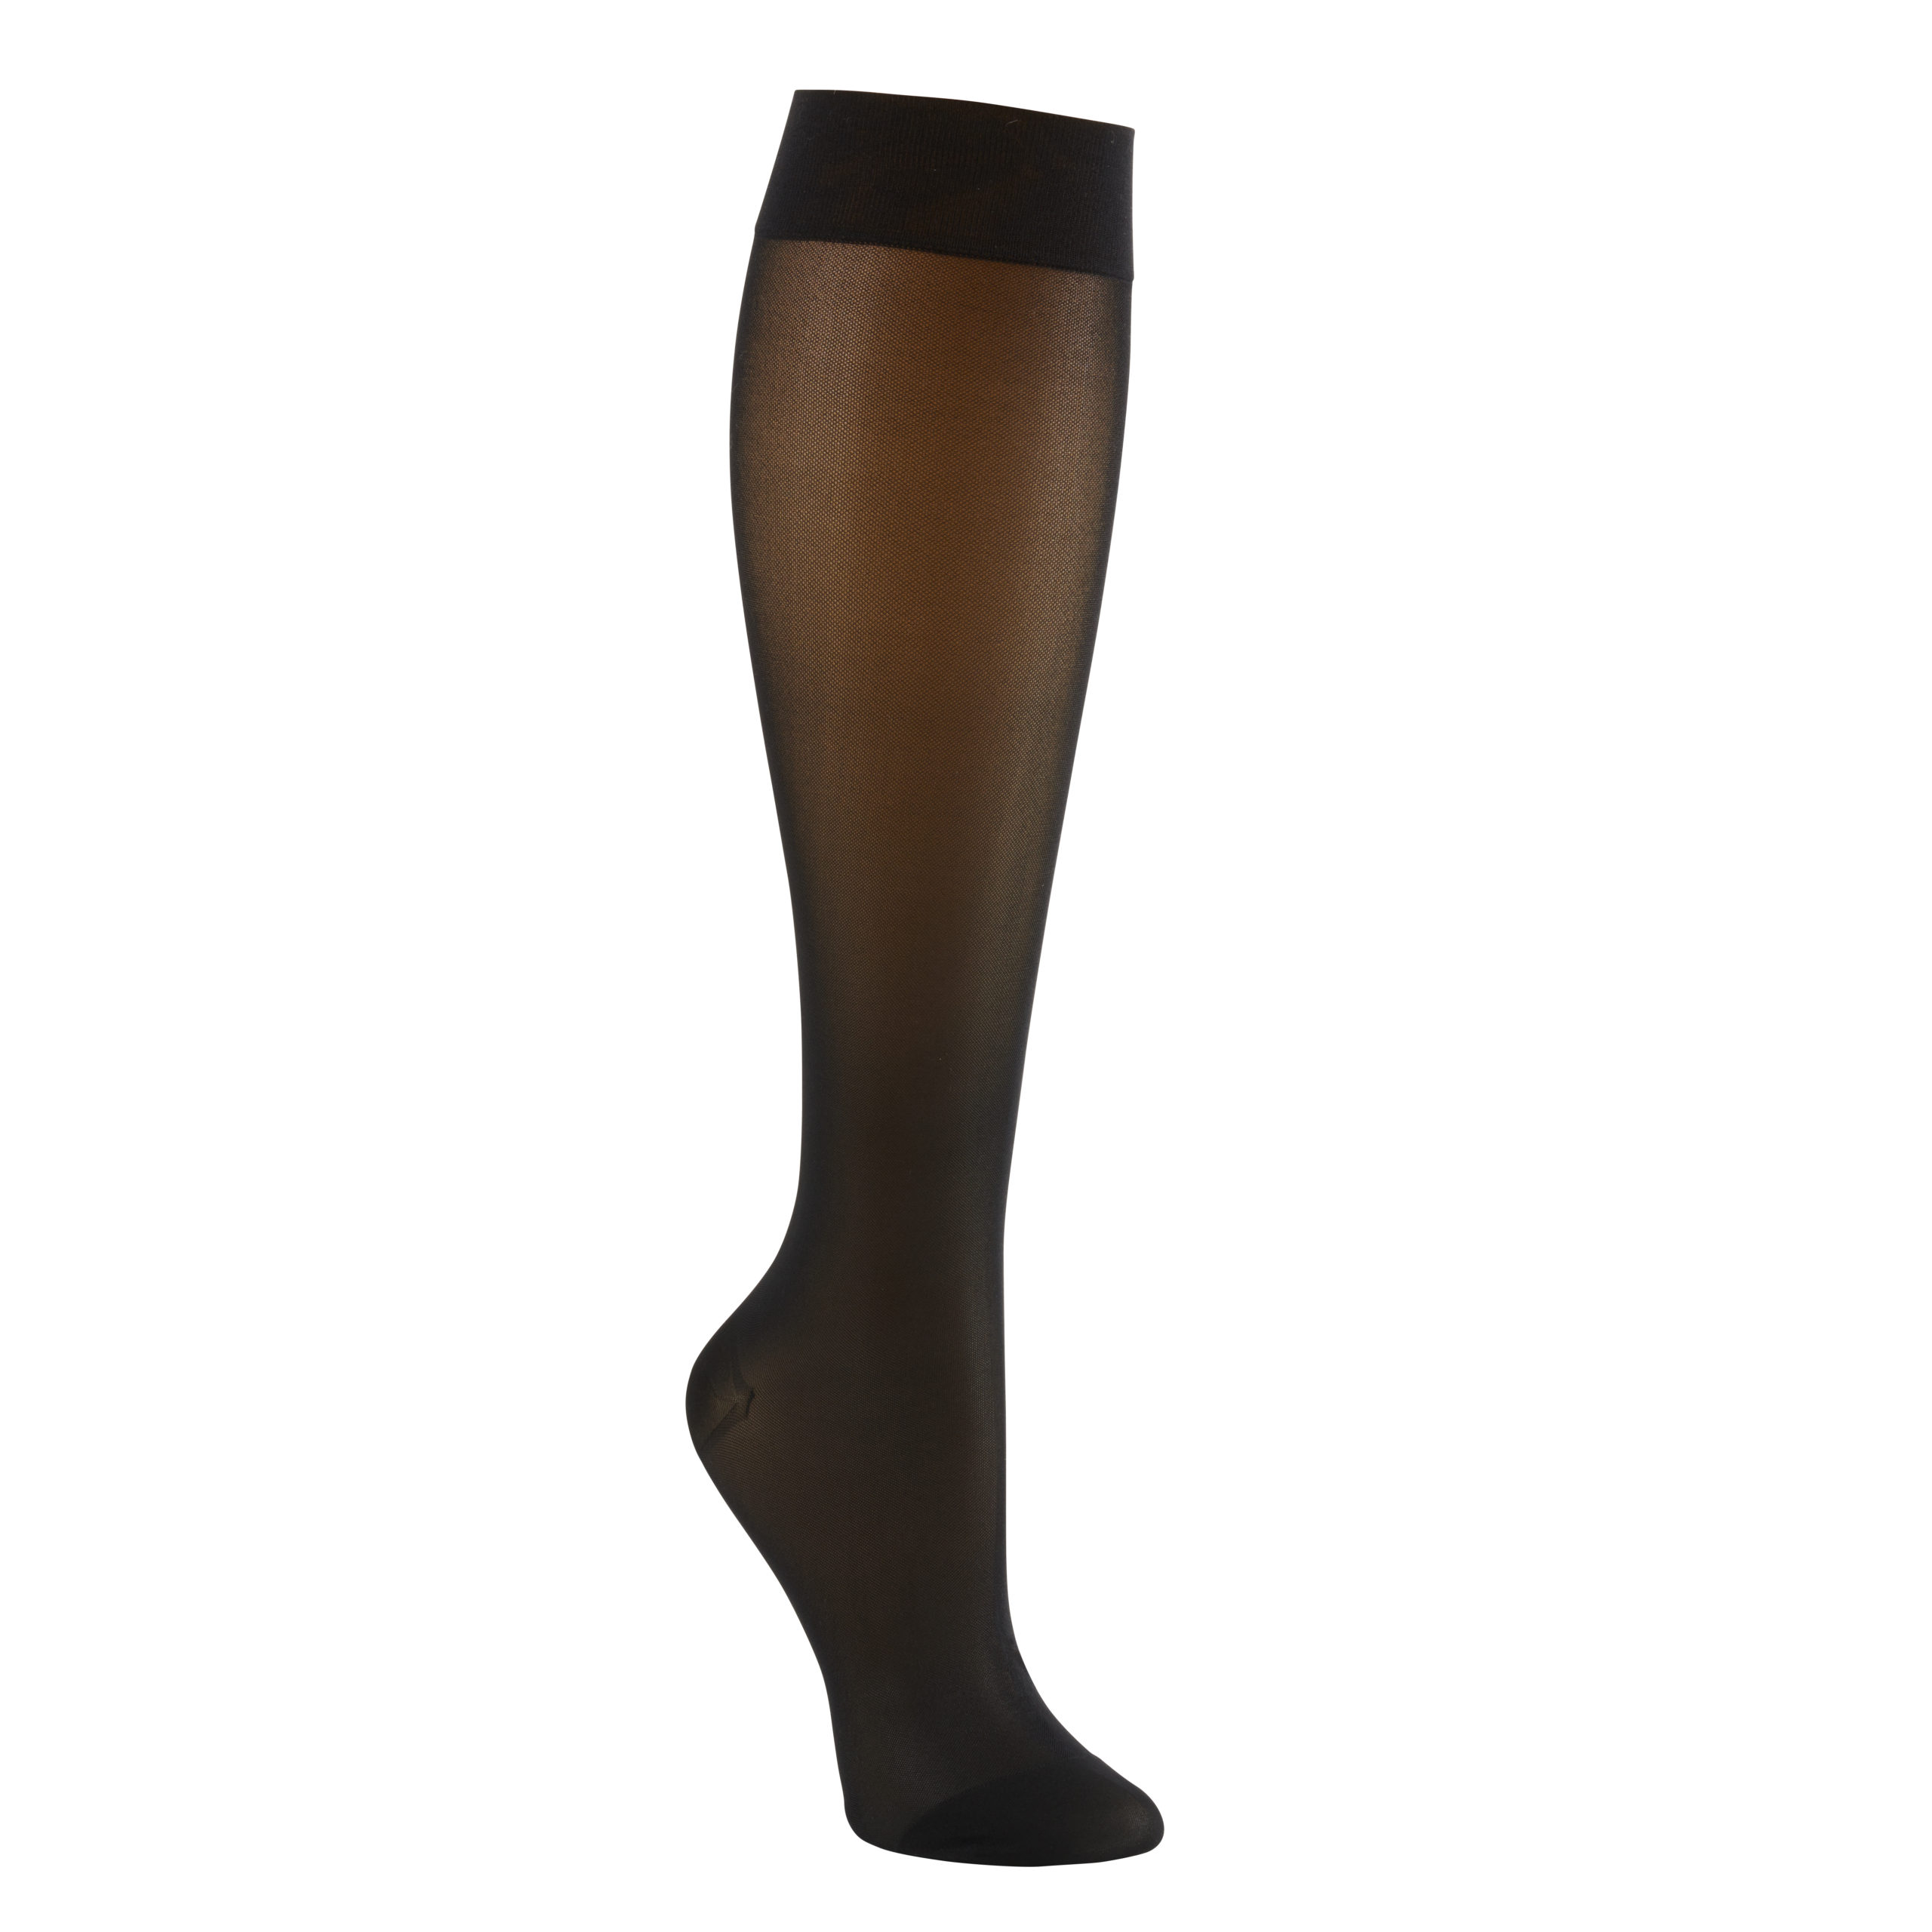 Supporo Sheer Knee-high Compression Socks, 25-30 mmHg - Supporo